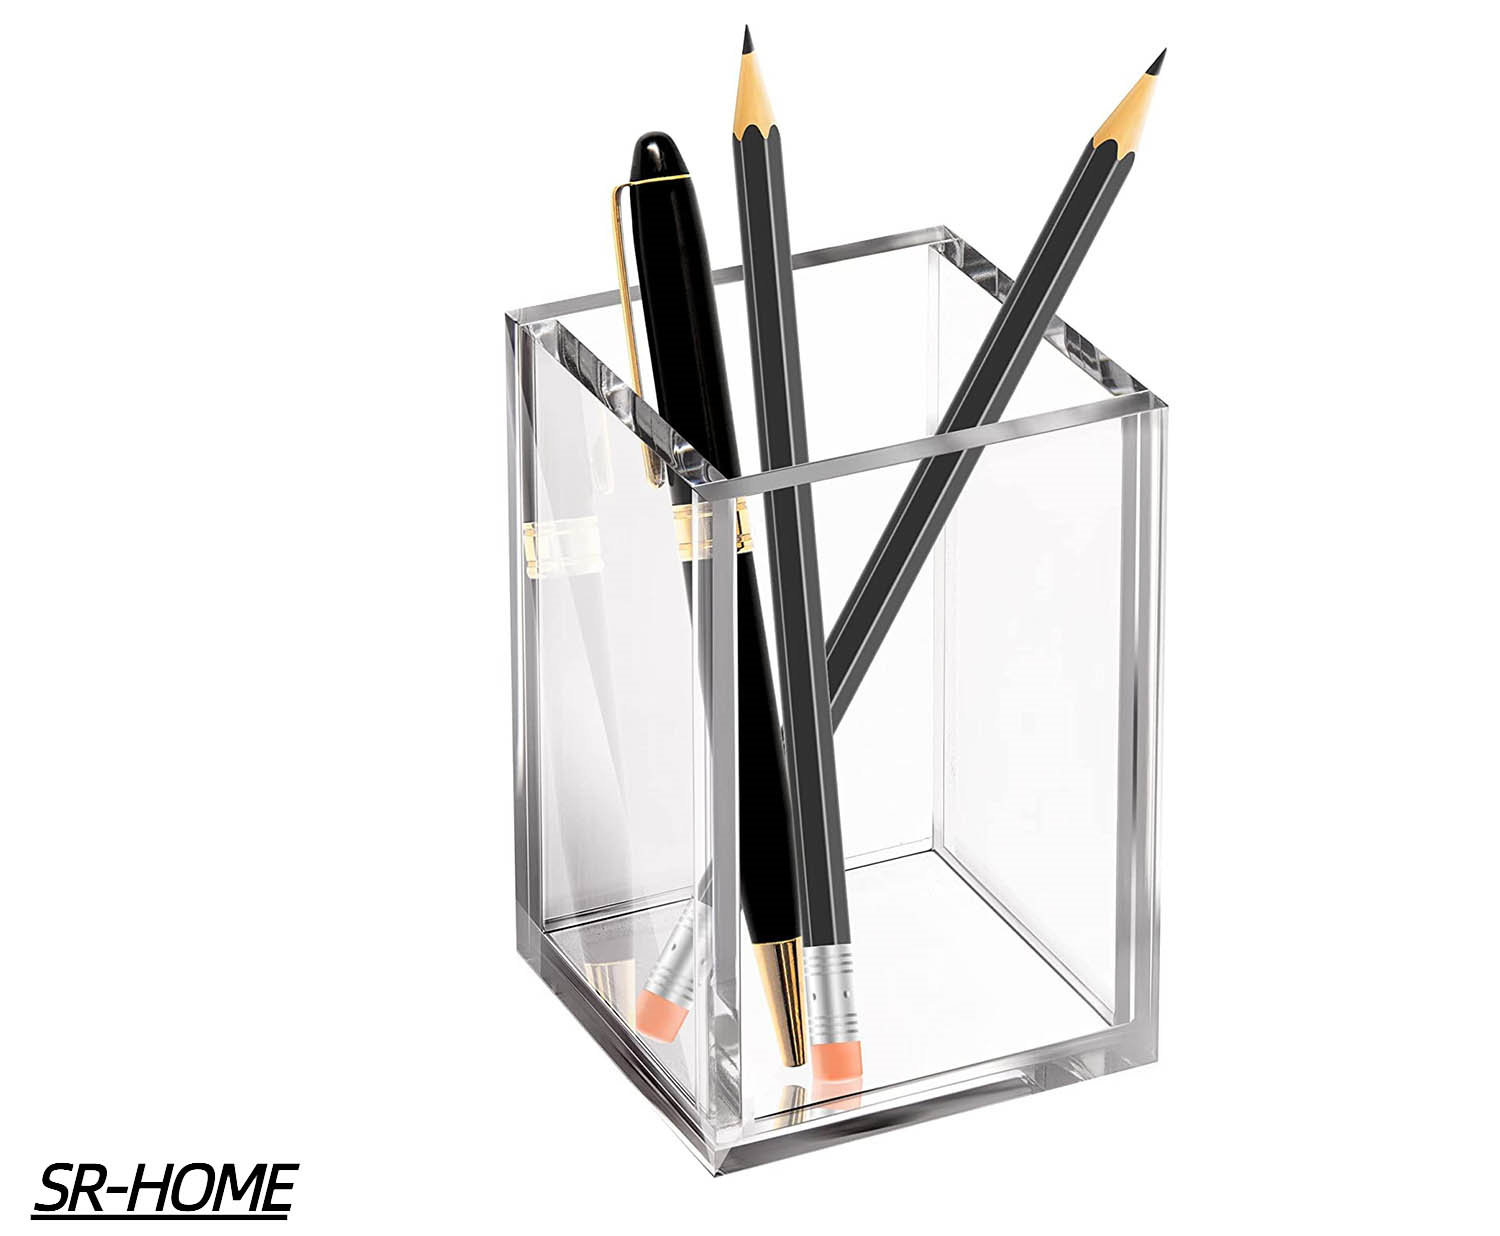 Clear Pencil Pen Holder 2 Pack, Acrylic Stationery Organizer for Home, School, and Office Desktop Accessories, Size: 4.3, Other